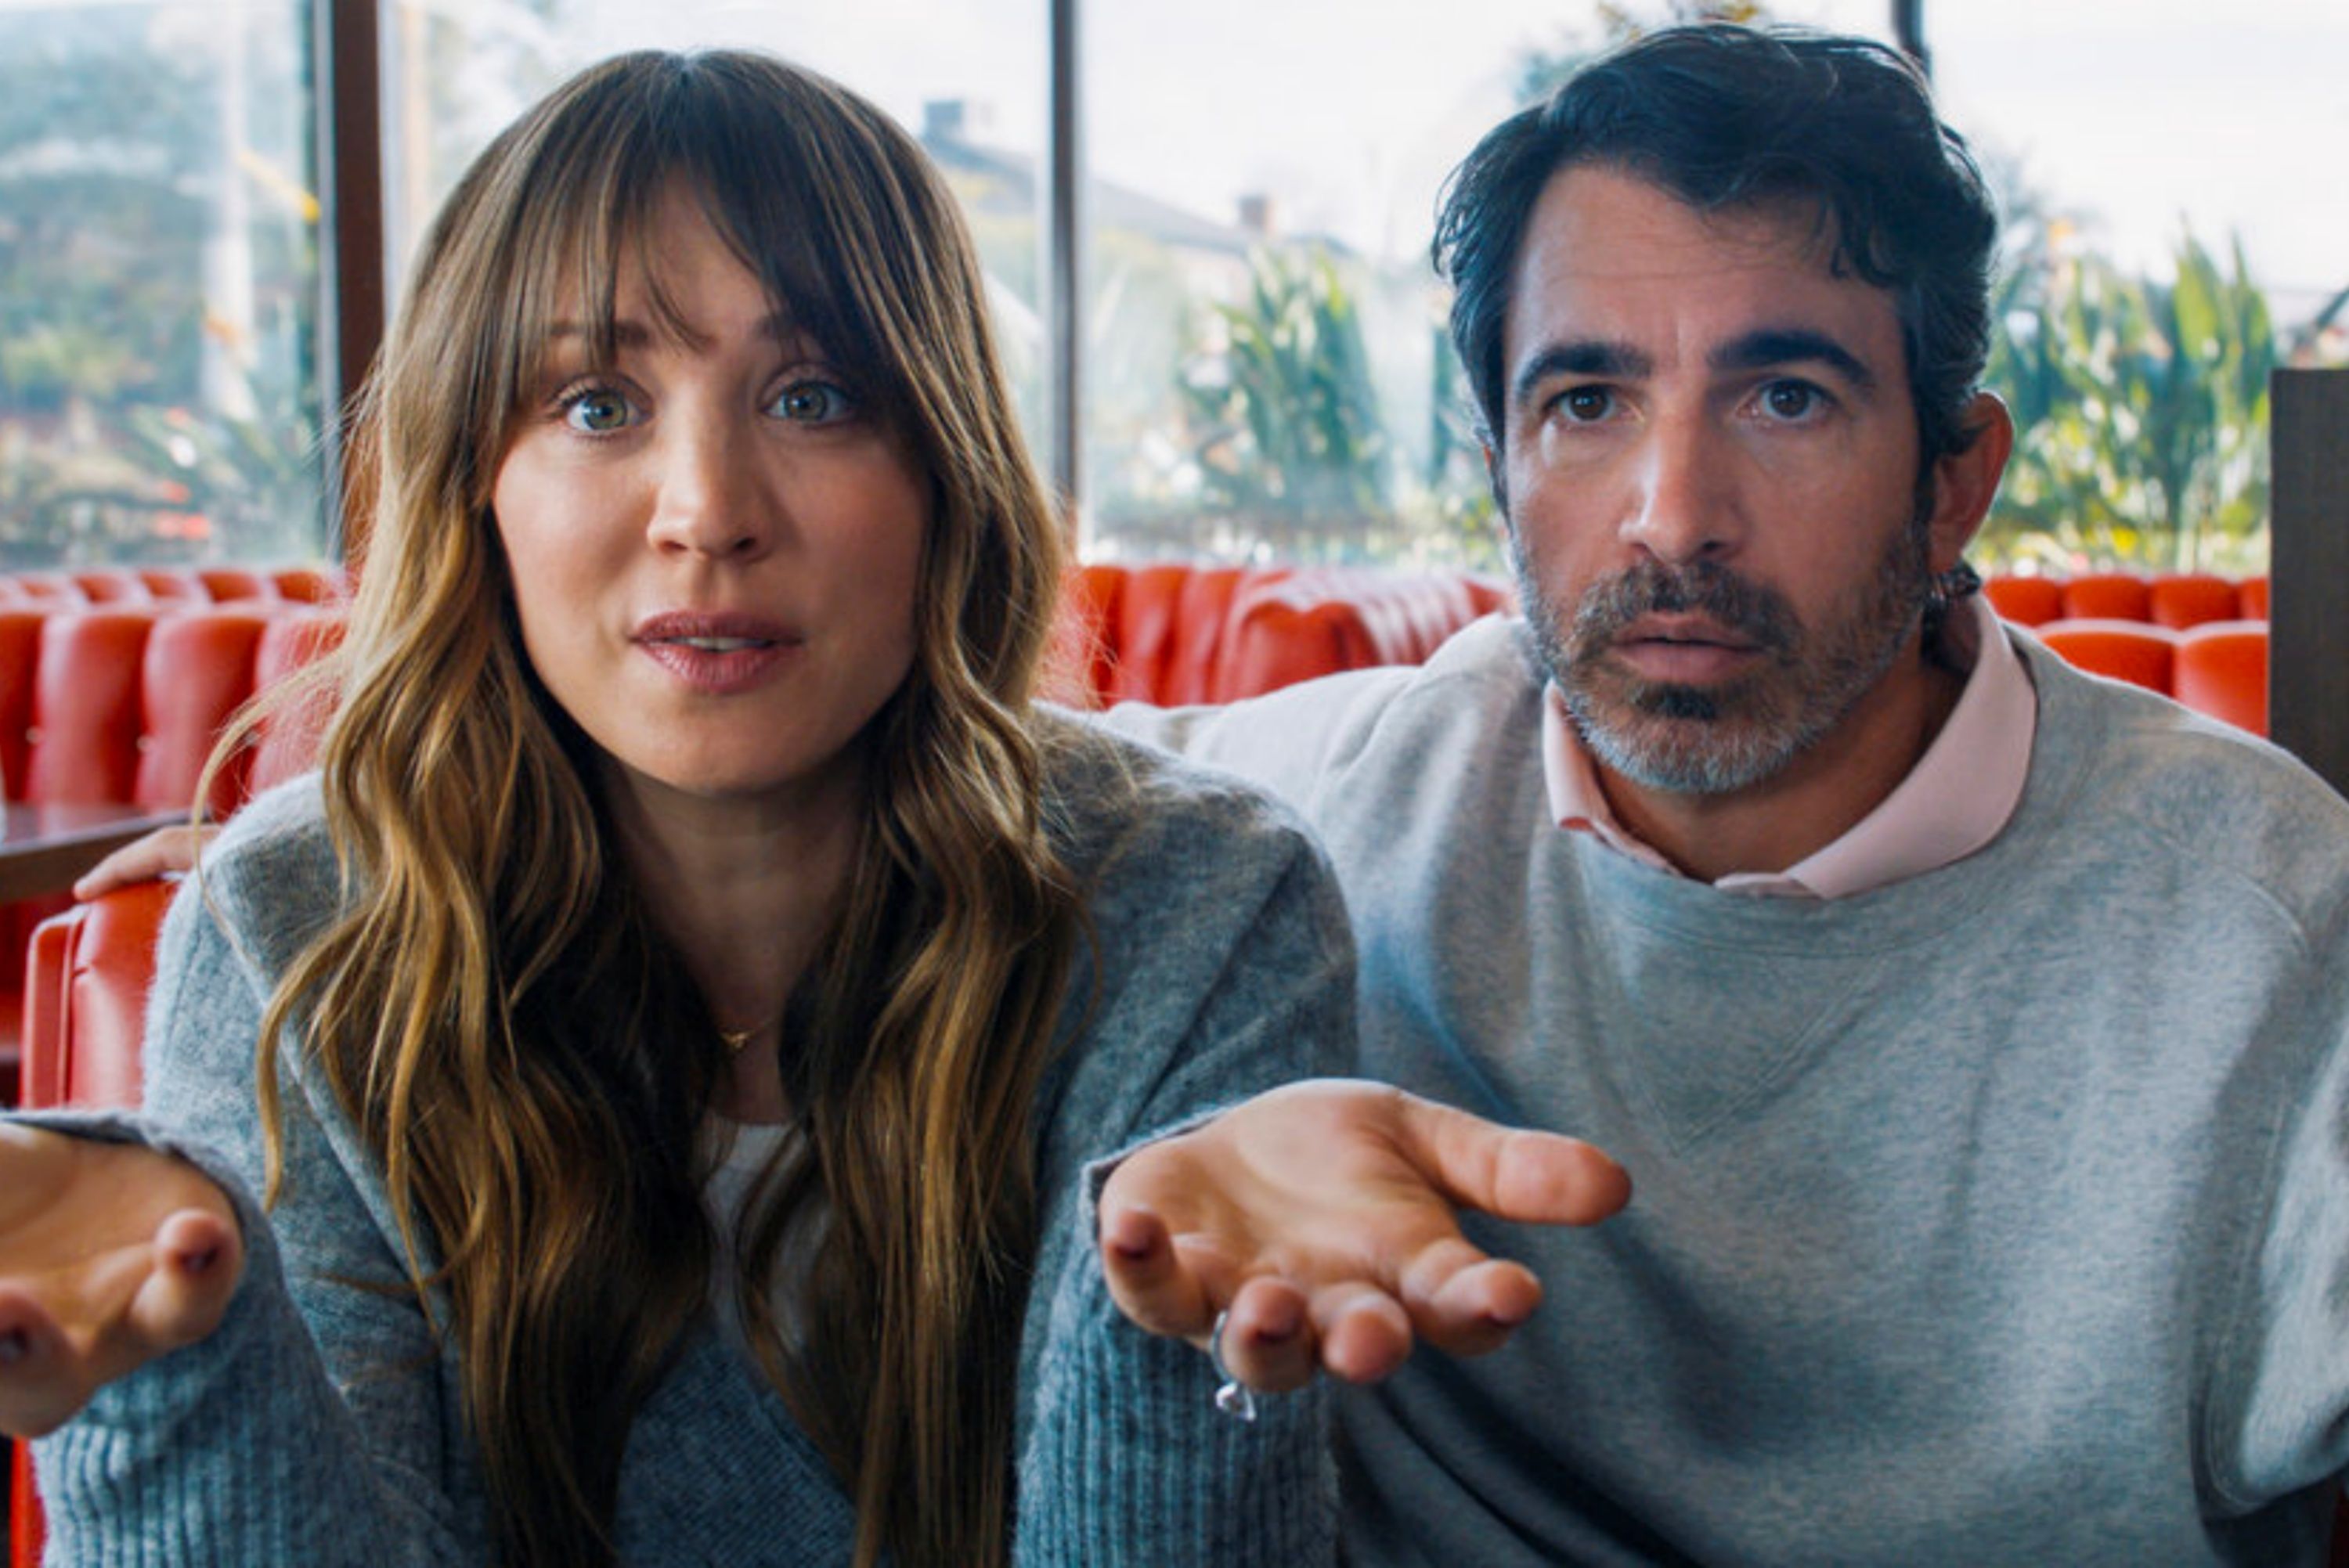 Chris Messina as Nathan Bartlett and Kaley Cuoco as Ava Bartlett in Based on a True Story